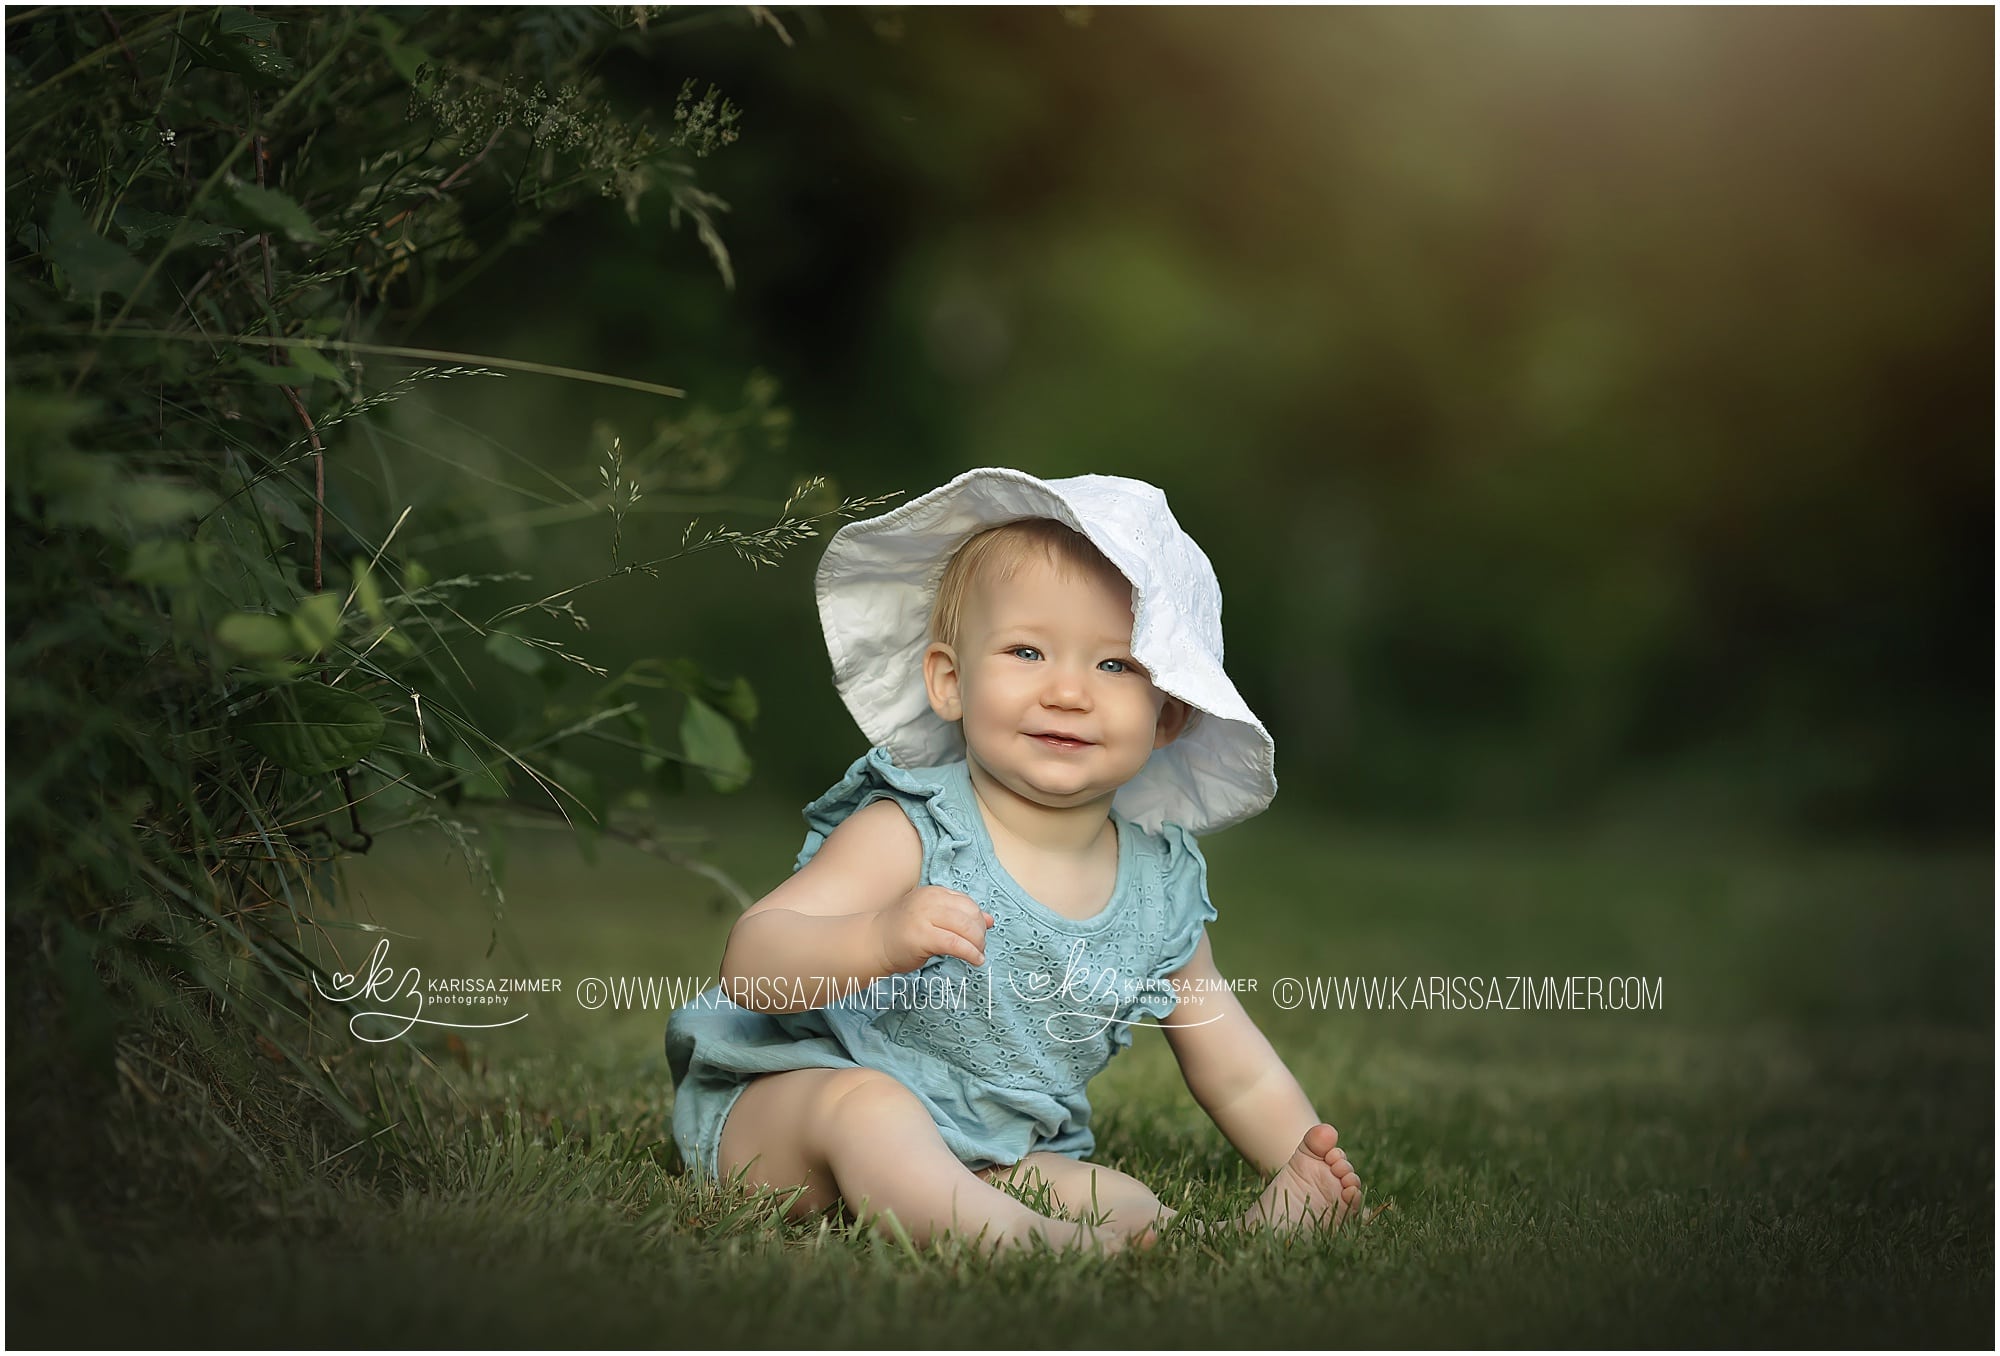 Baby girl portrait at outdoor family photography session in Mechanicsburg PA